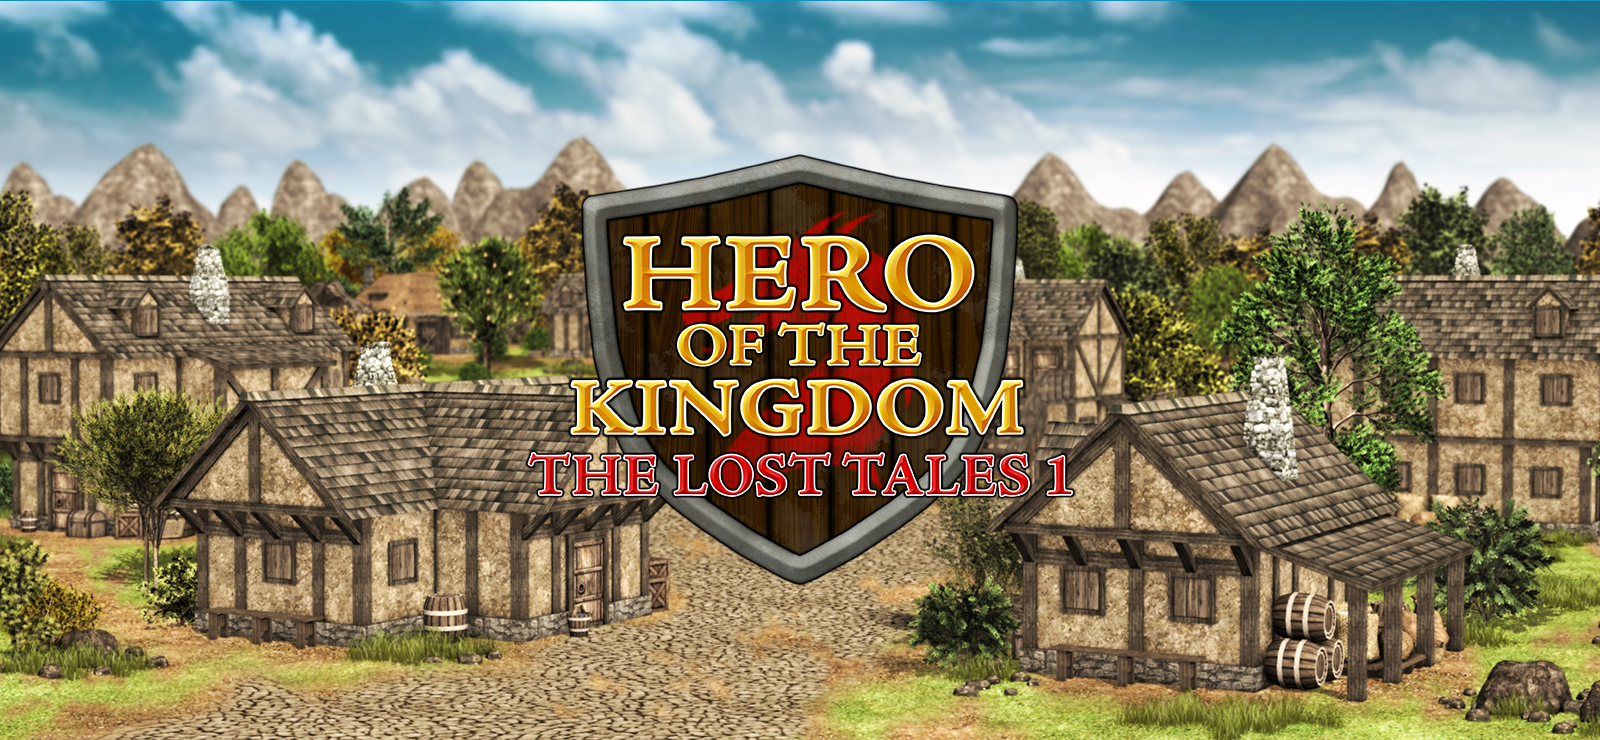 Hero Of The Kingdom: The Lost Tales 1